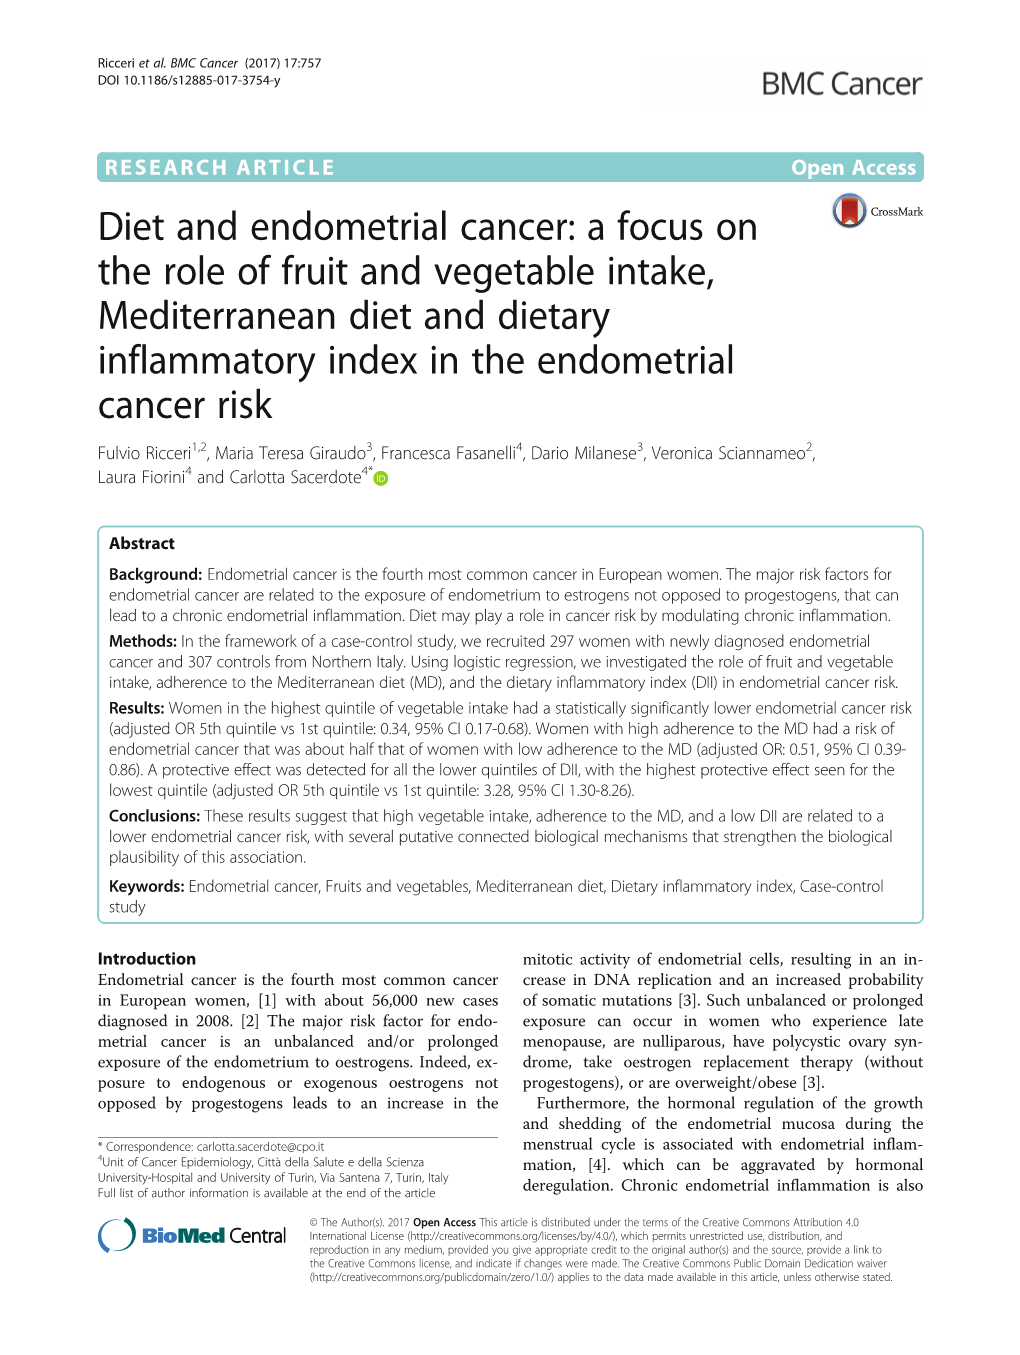 Diet and Endometrial Cancer